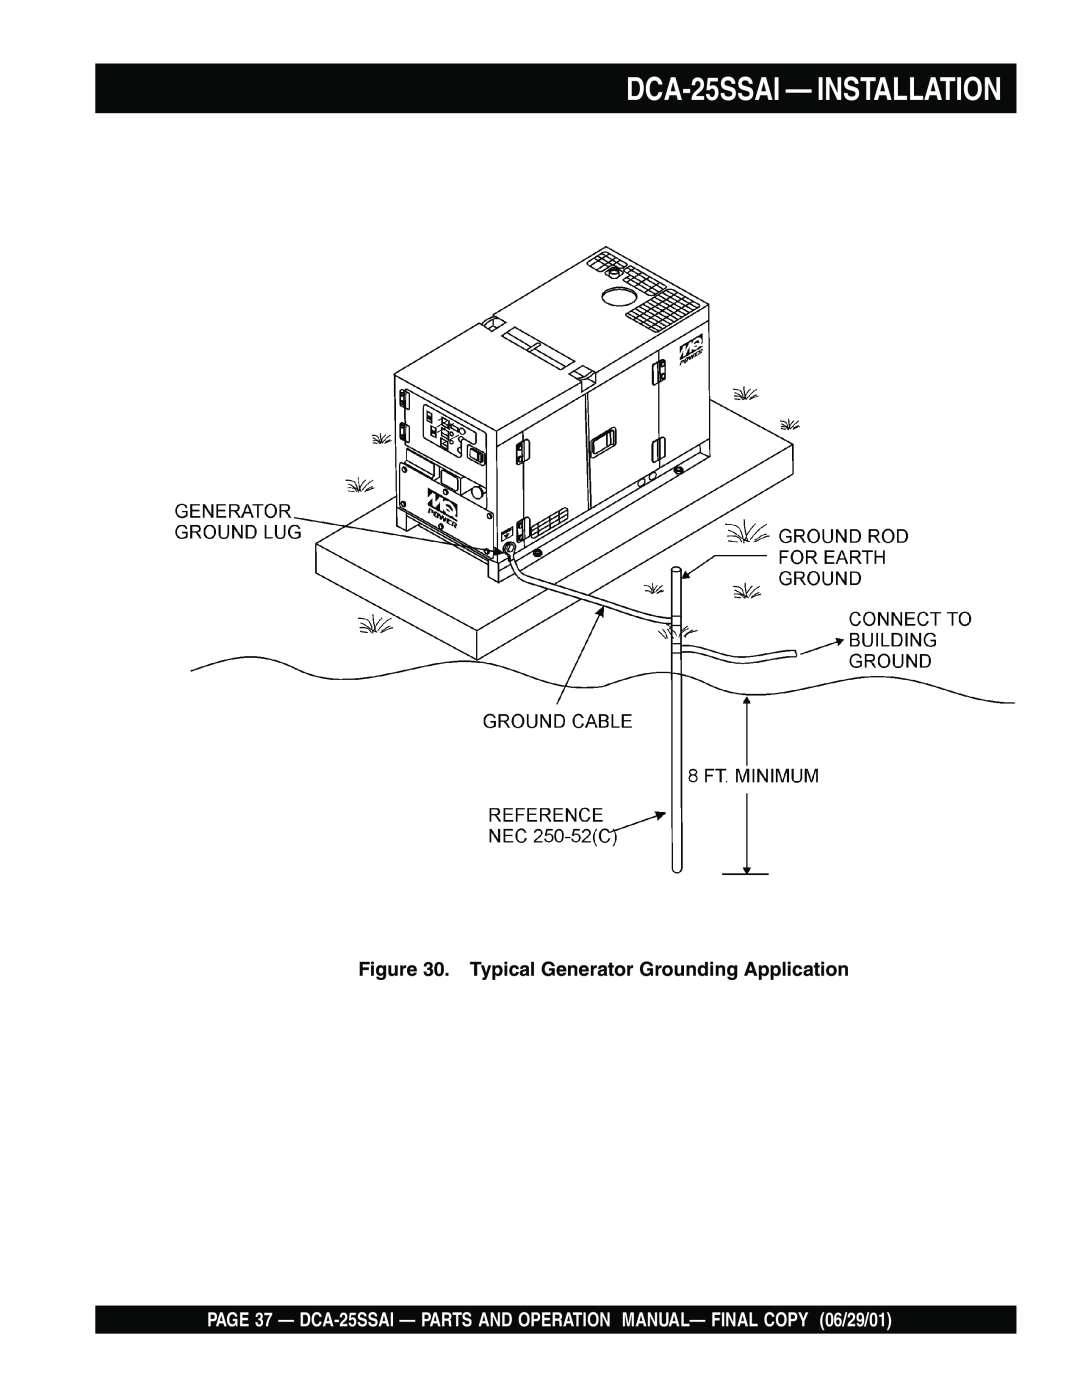 Multiquip operation manual DCA-25SSAI - INSTALLATION, Typical Generator Grounding Application 